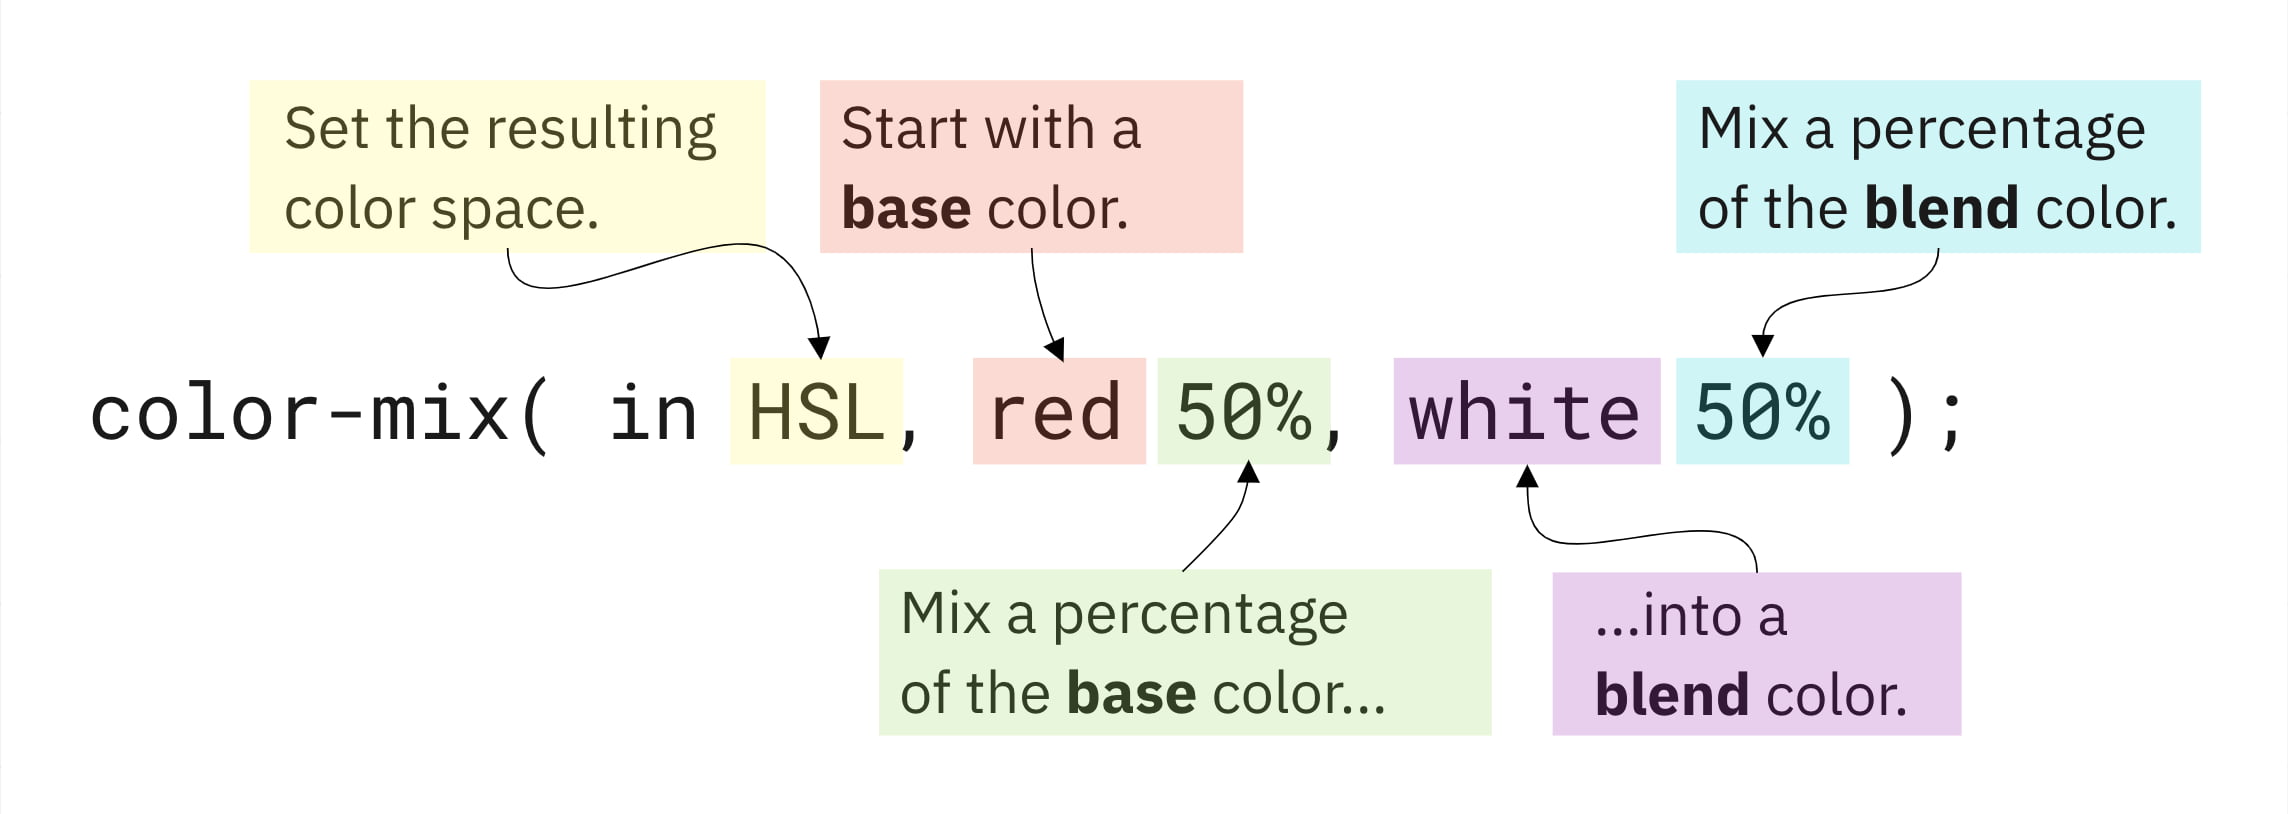 color-mix funcion parts explained. For a line color-mix( in HSL, red 50%, white ); HSL is to set the resulting color space. Red is a base color and 50% is a percentage of the base color. White is the blend color.